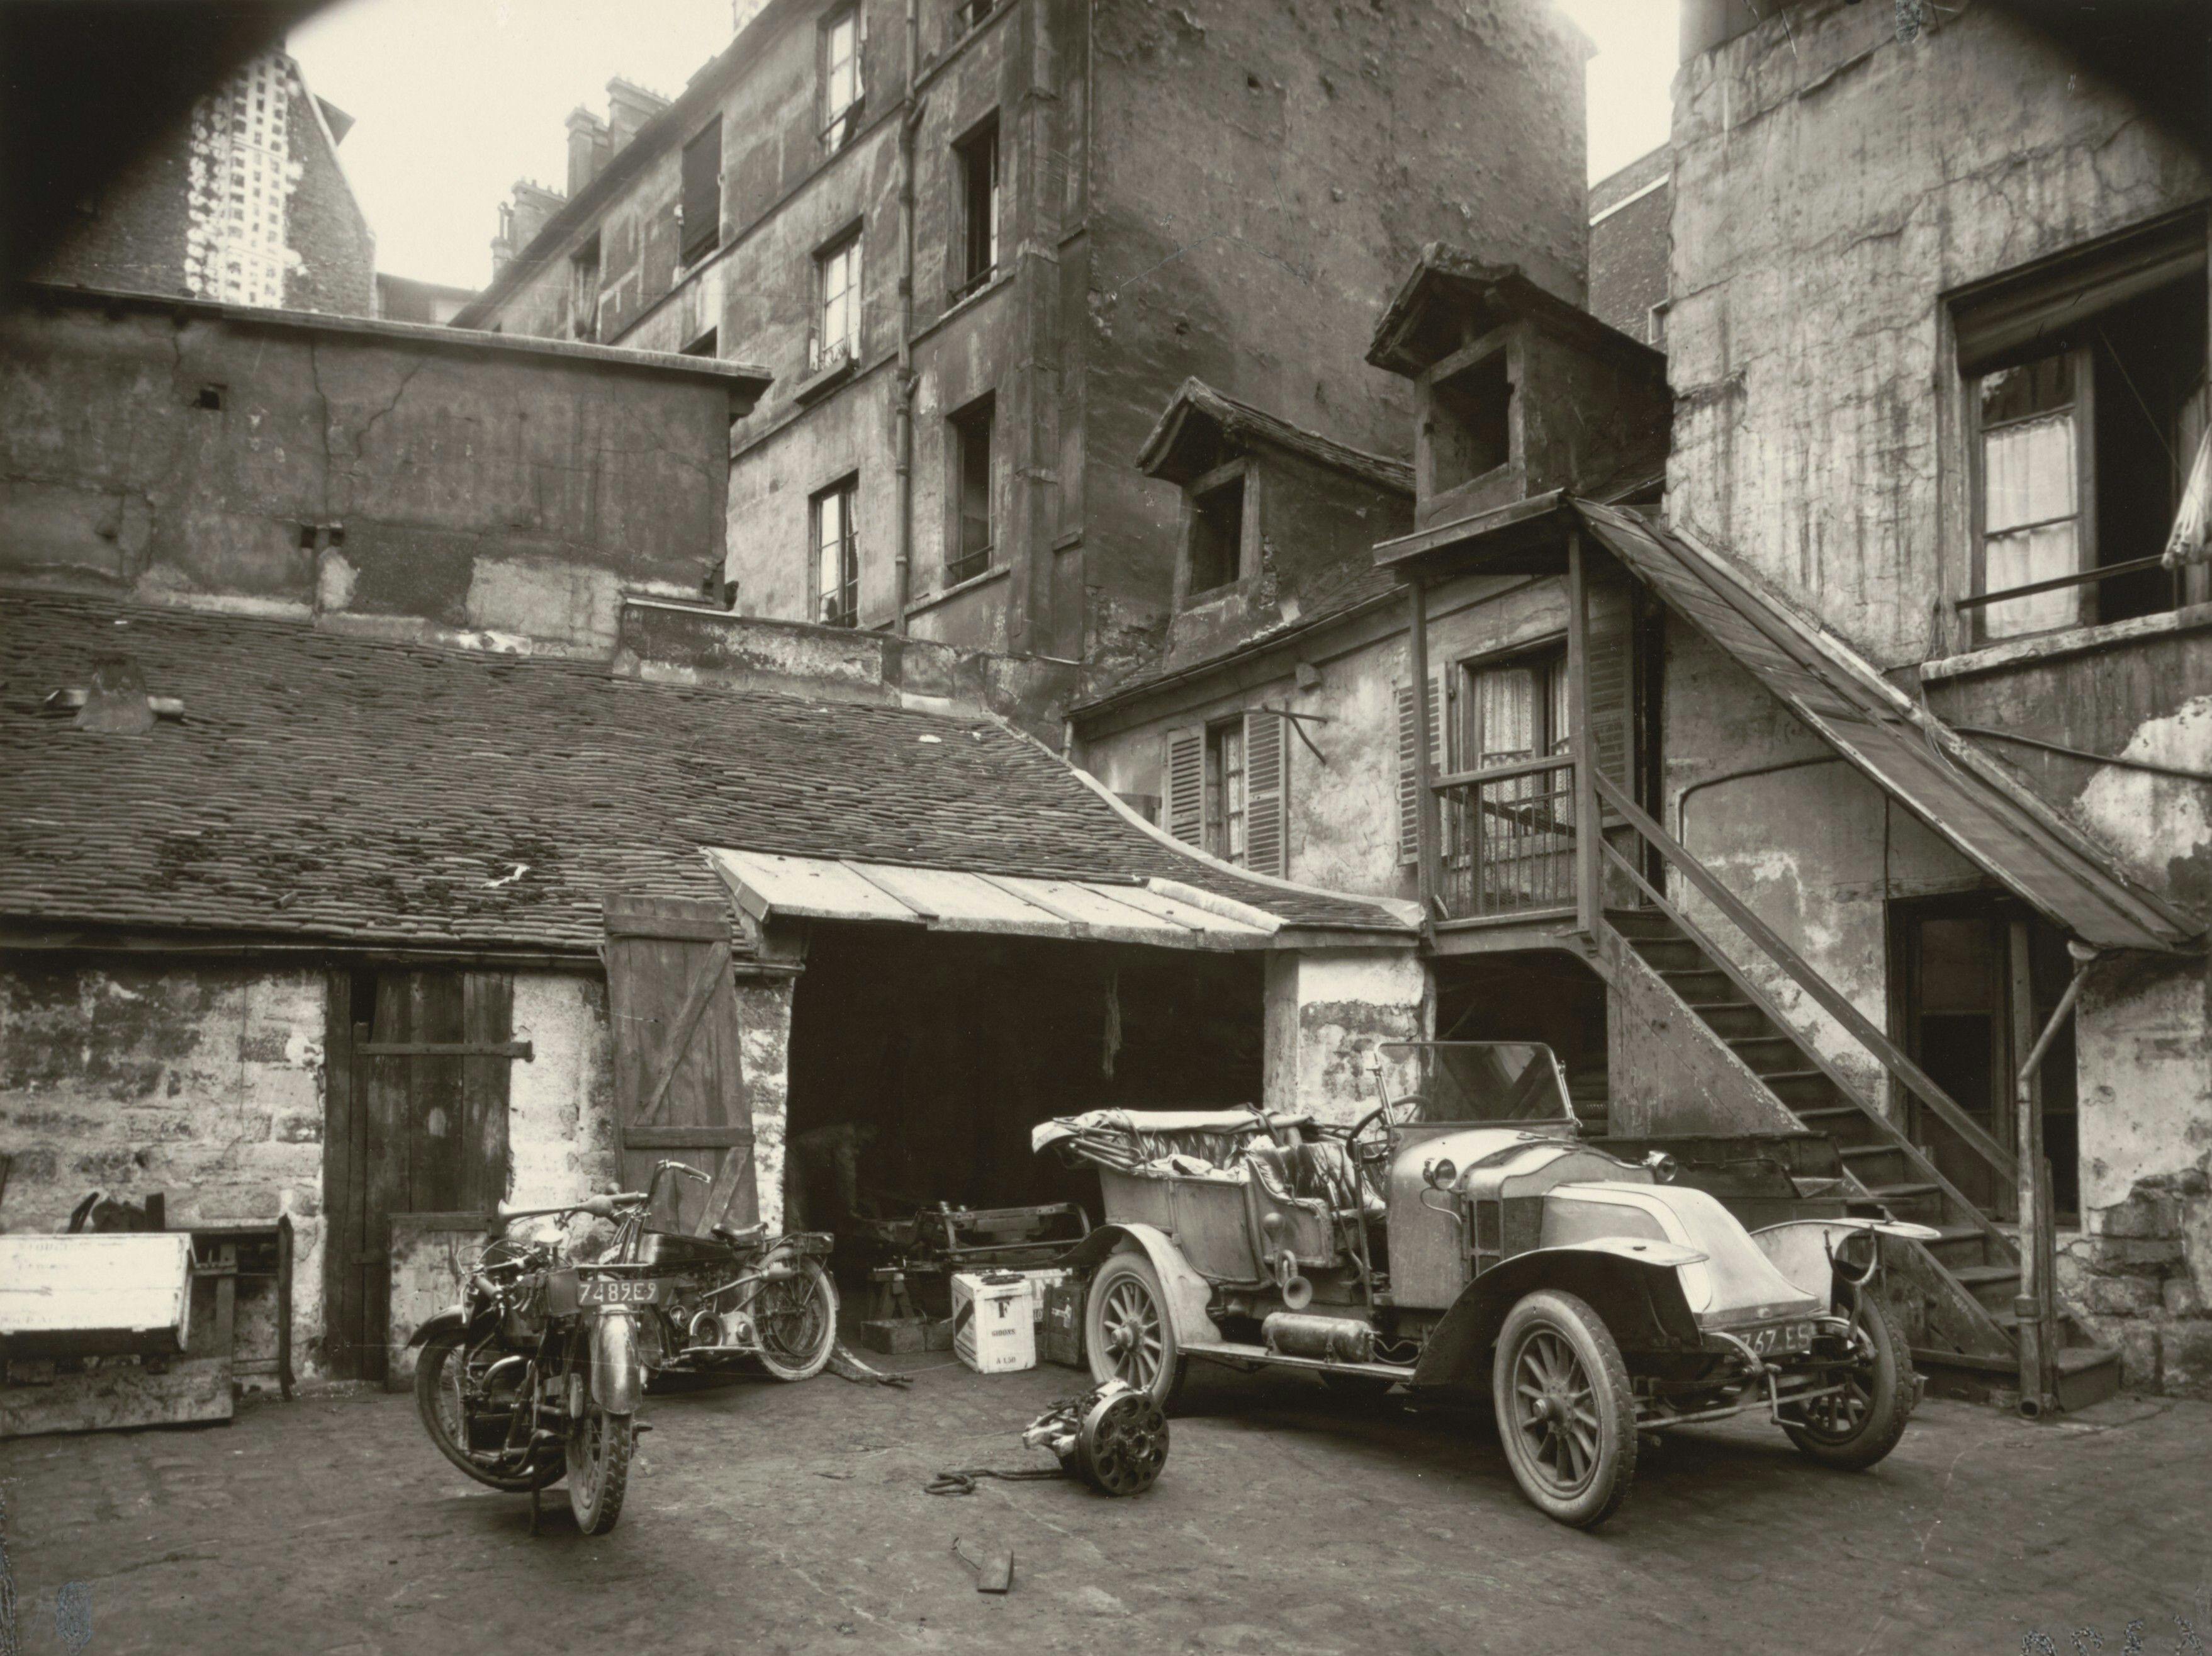 old photograph of a cluttered courtyard with a dilapidated building, vintage cars, motorcycles, and a wooden staircase, by Eugène Atget